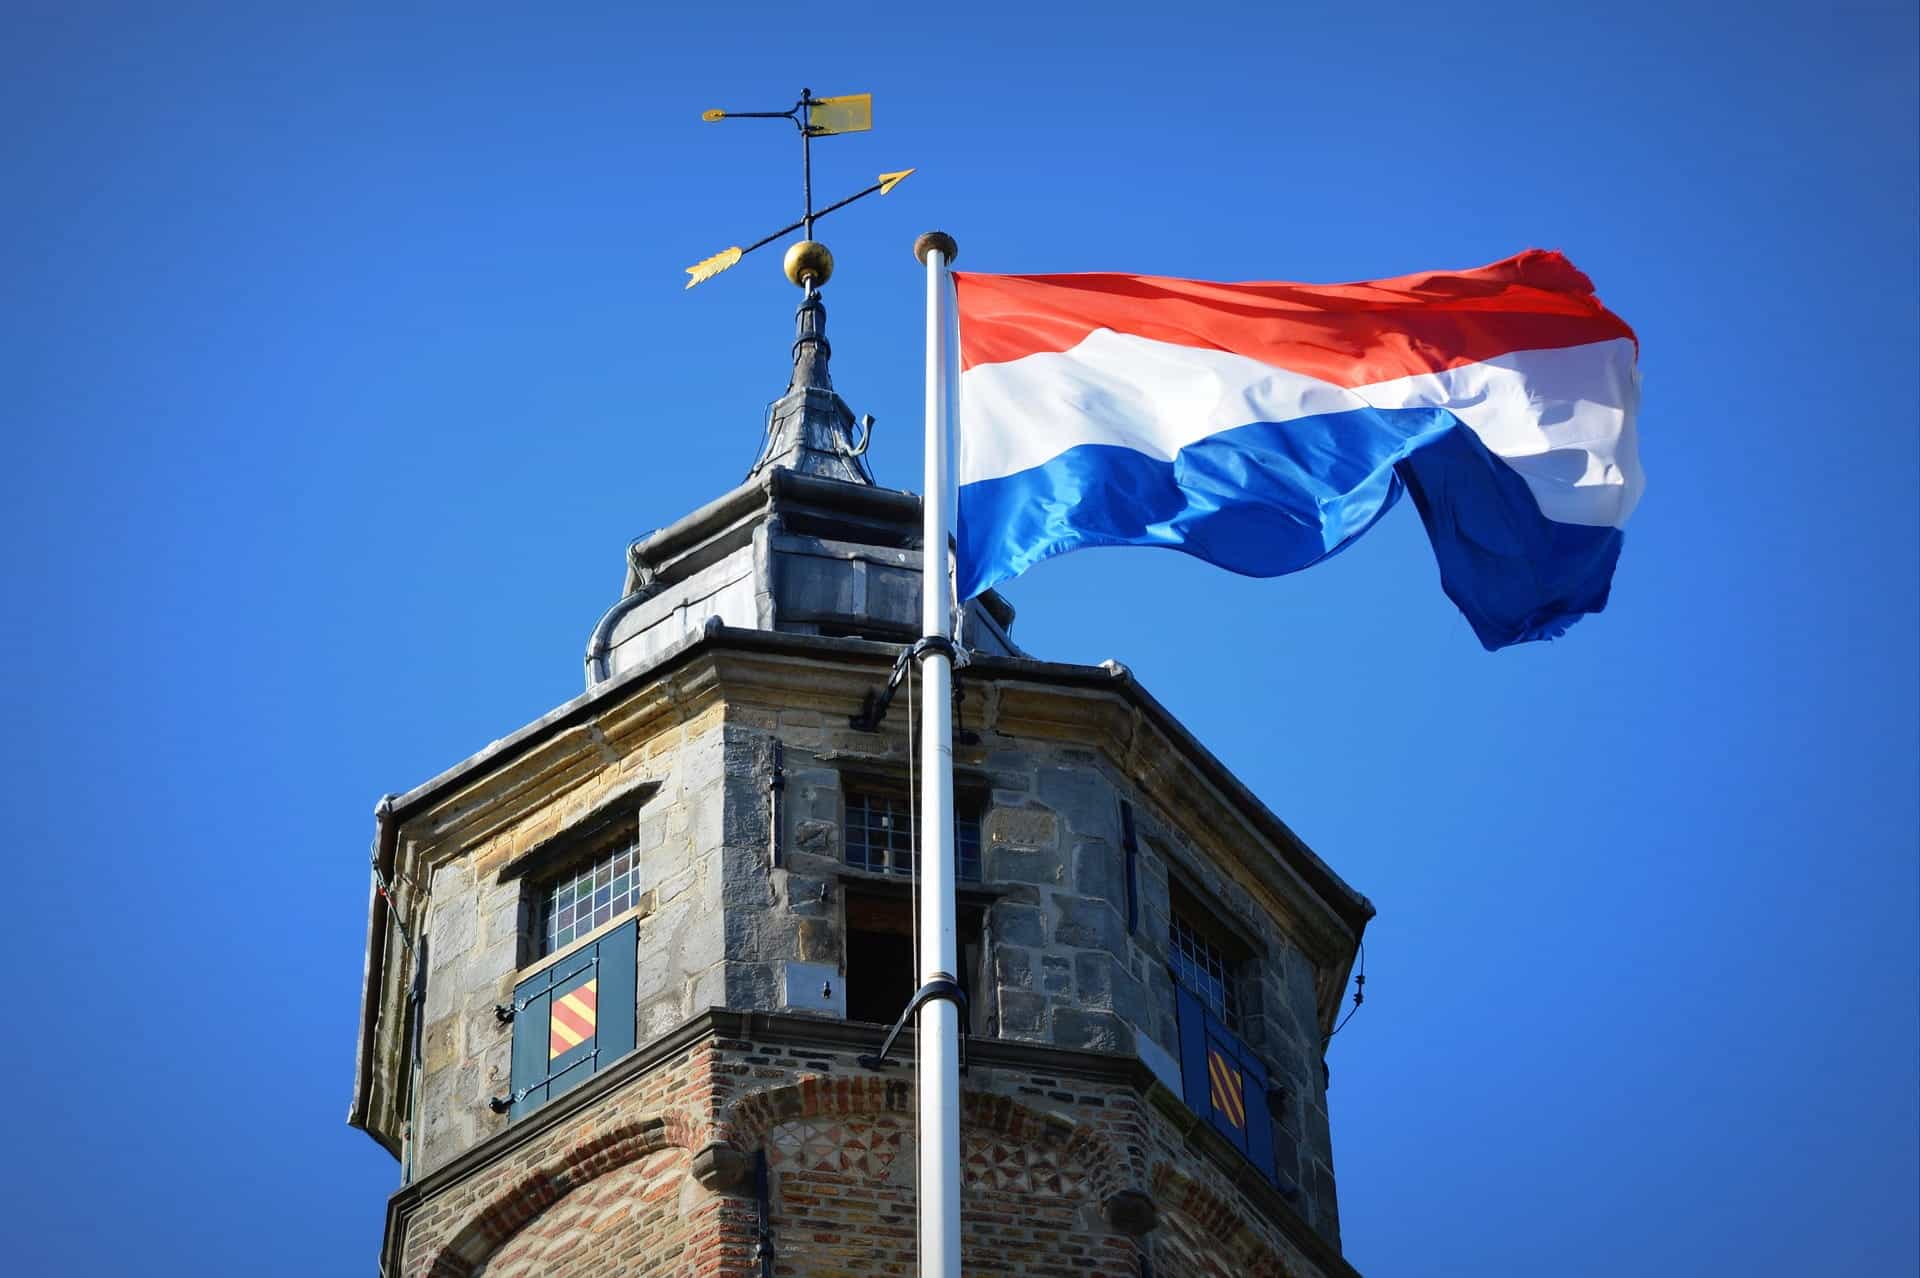 A Dutch flag on a flag pole flying in front of a tower